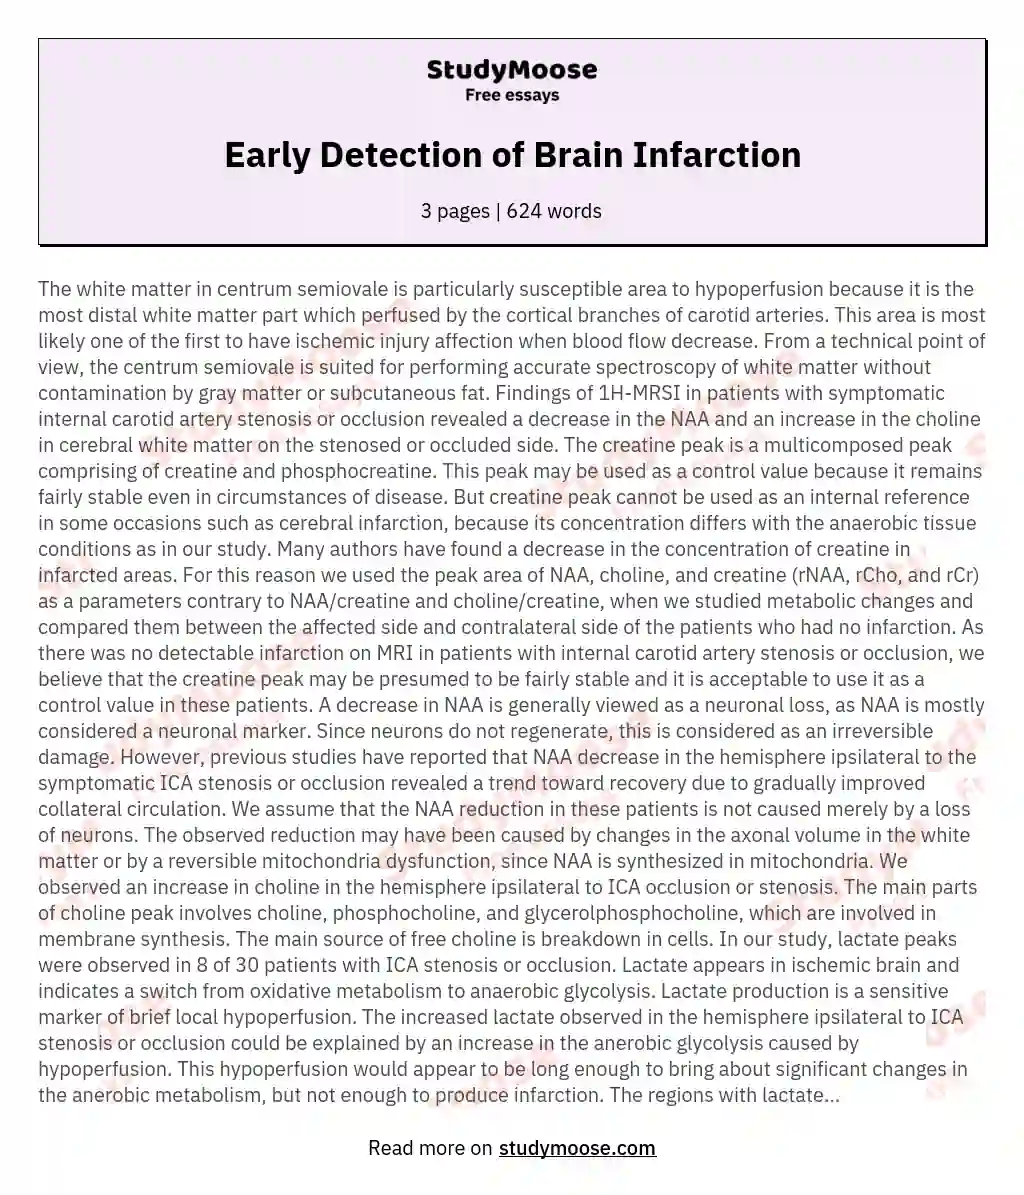 Early Detection of Brain Infarction essay